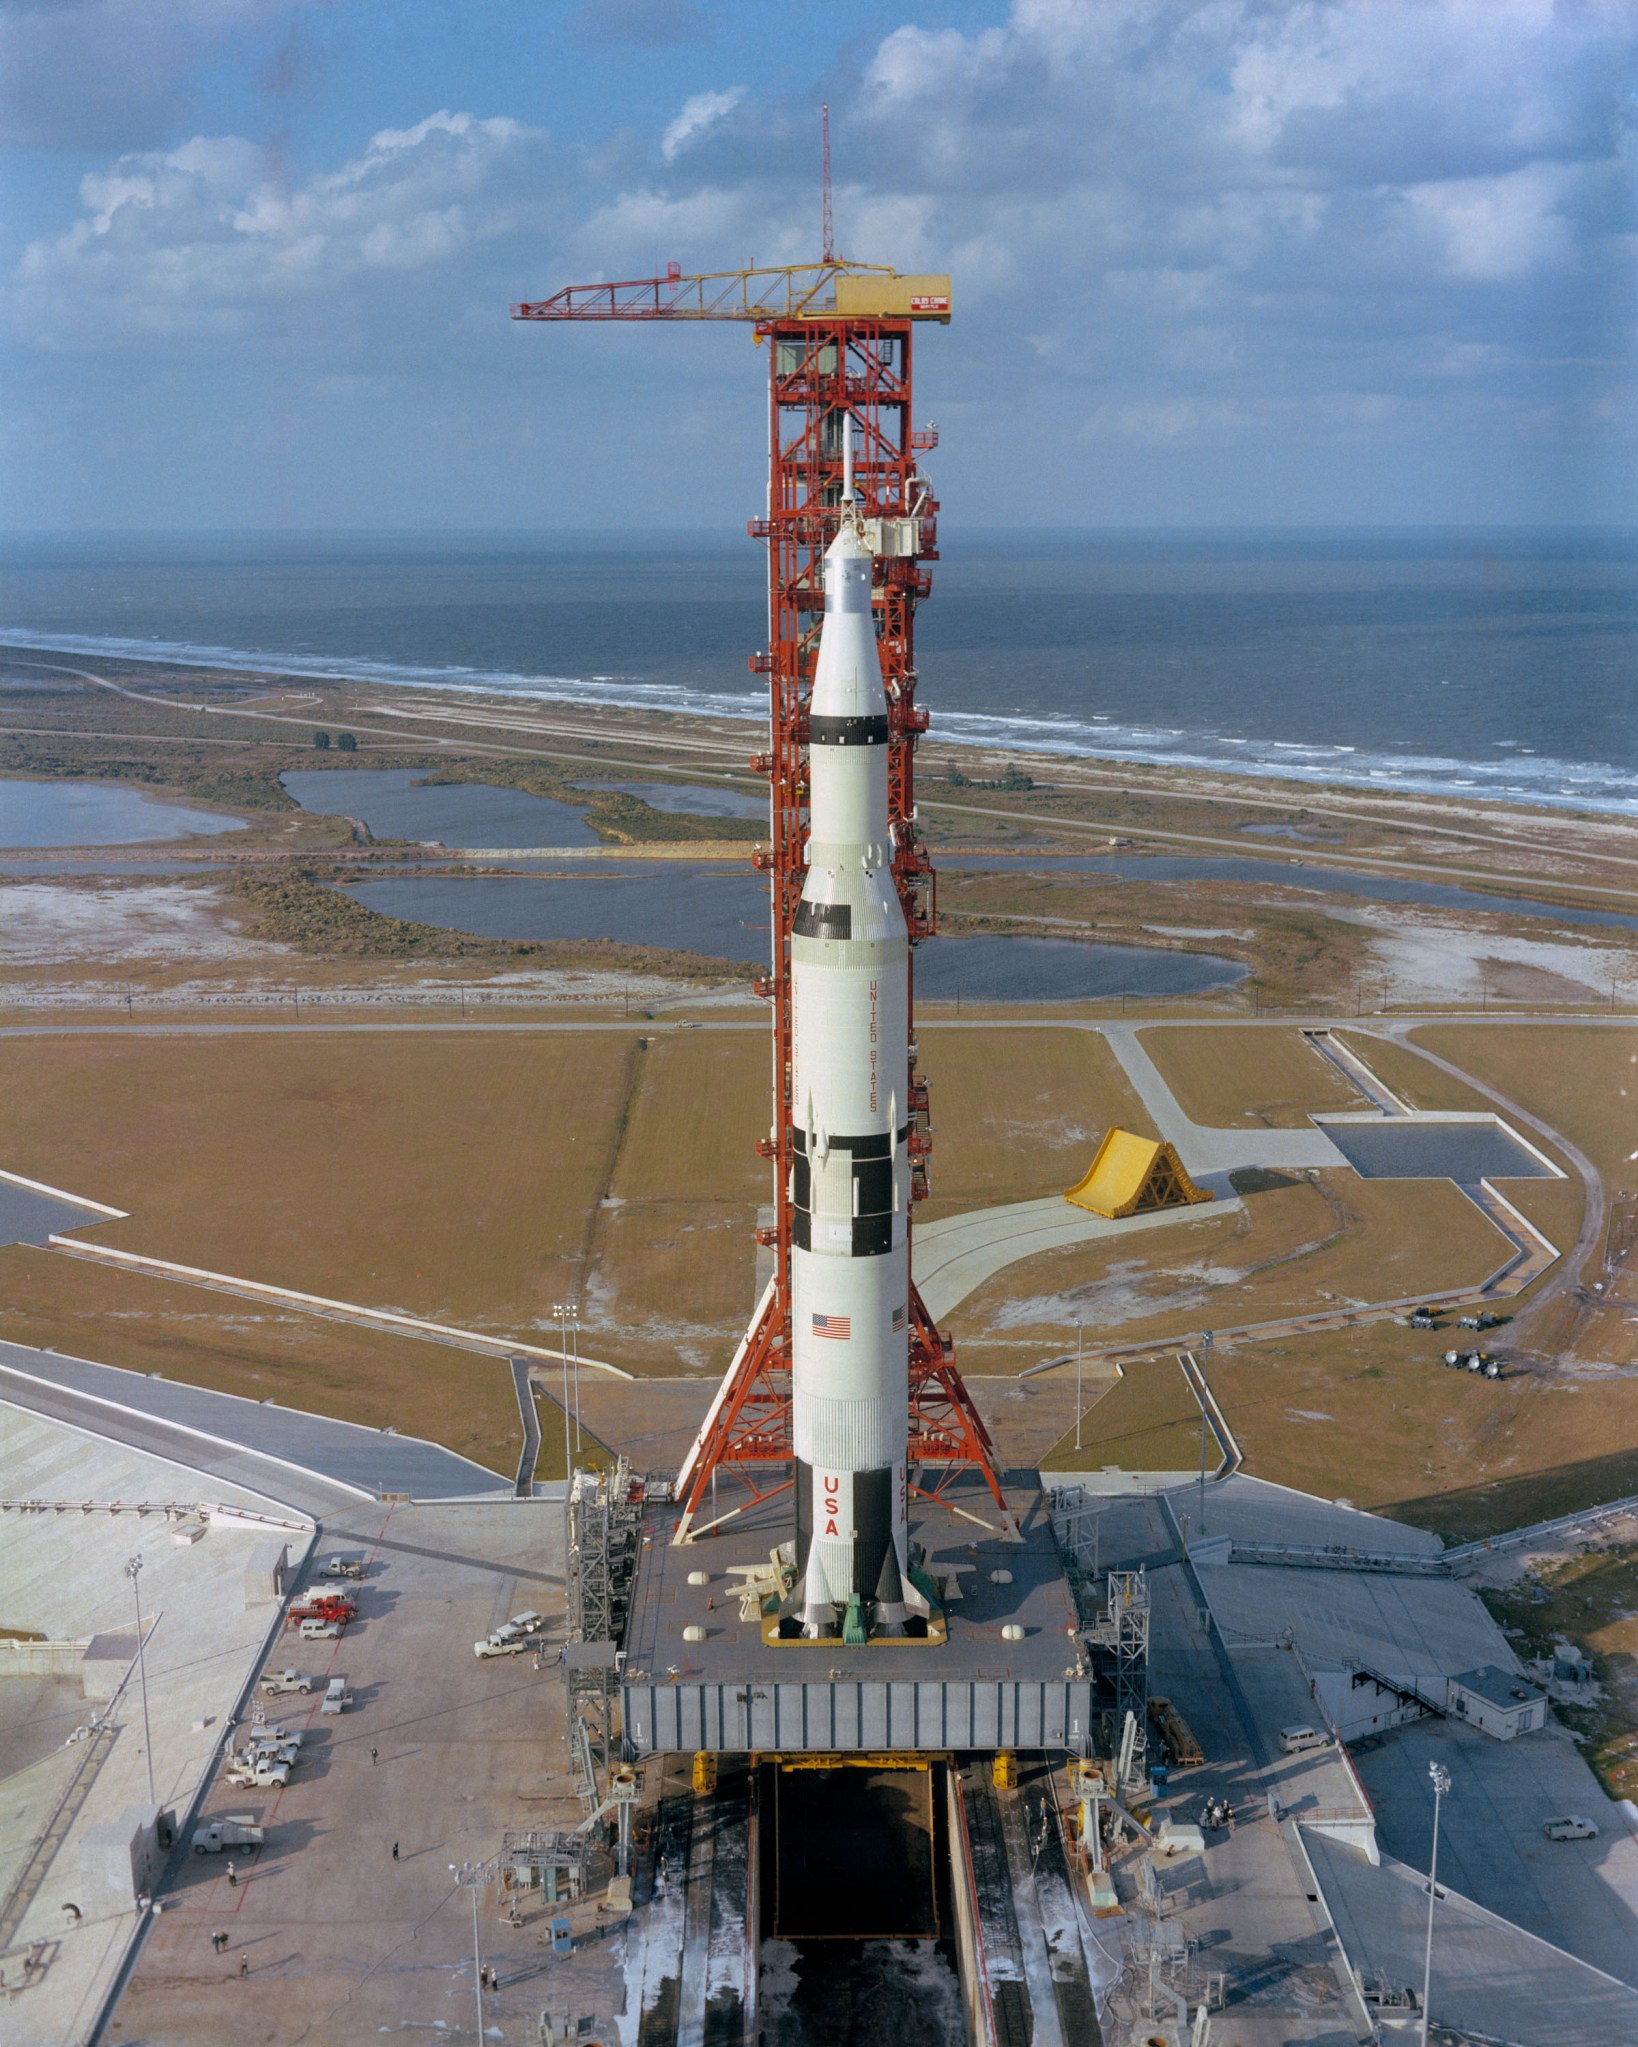 Apollo 4 atop its Saturn 5 rocket on Pad 39A at the Kennedy Space Center.